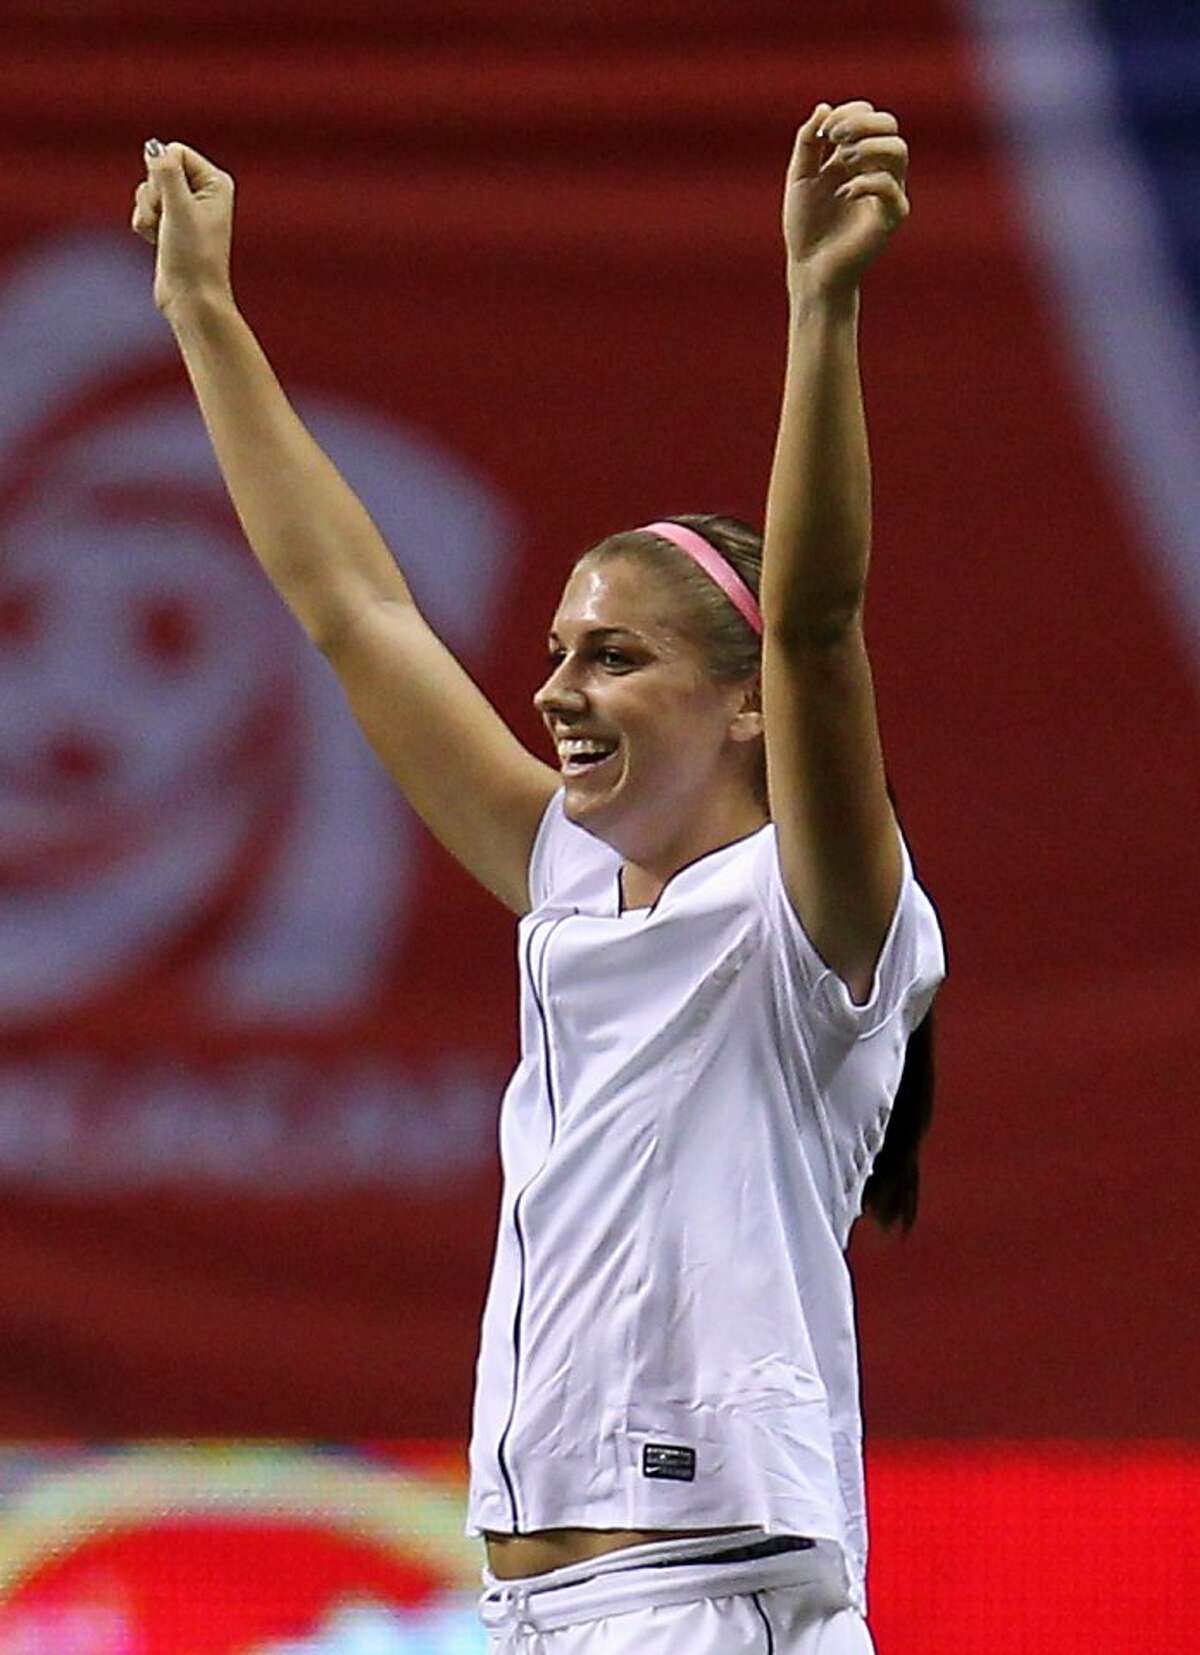 United States' Alex Morgan (13) celebrates her team's 3-0 win over Costa Rica in CONCACAF women's Olympic qualifying soccer game action at B.C. Place in Vancouver, British Columbia, Friday, Jan. 27, 2012. (AP Photo/The Canadian Press, Jonathan Hayward)